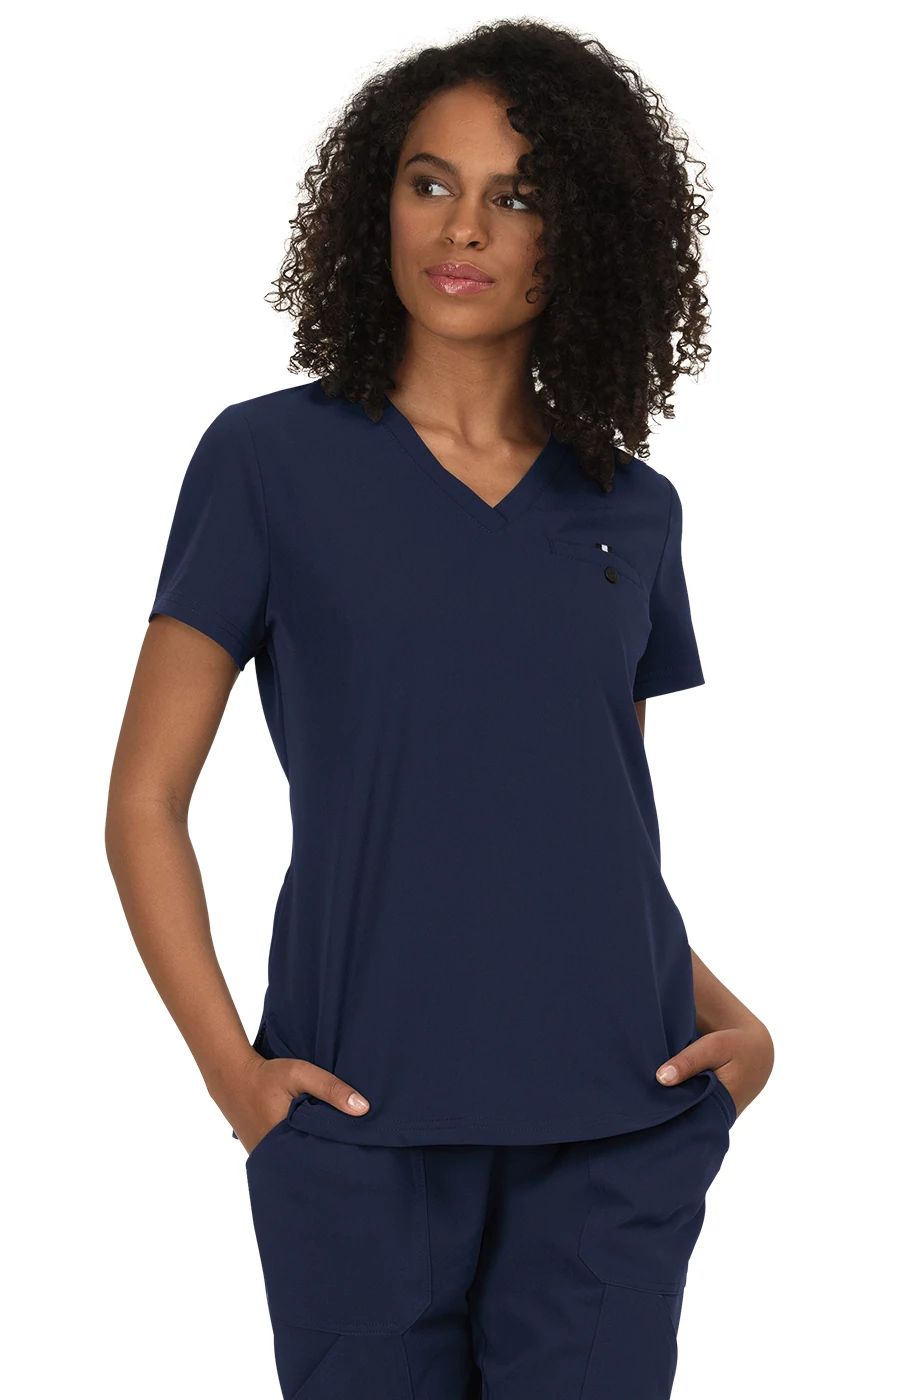 ready-to-work-top-navy